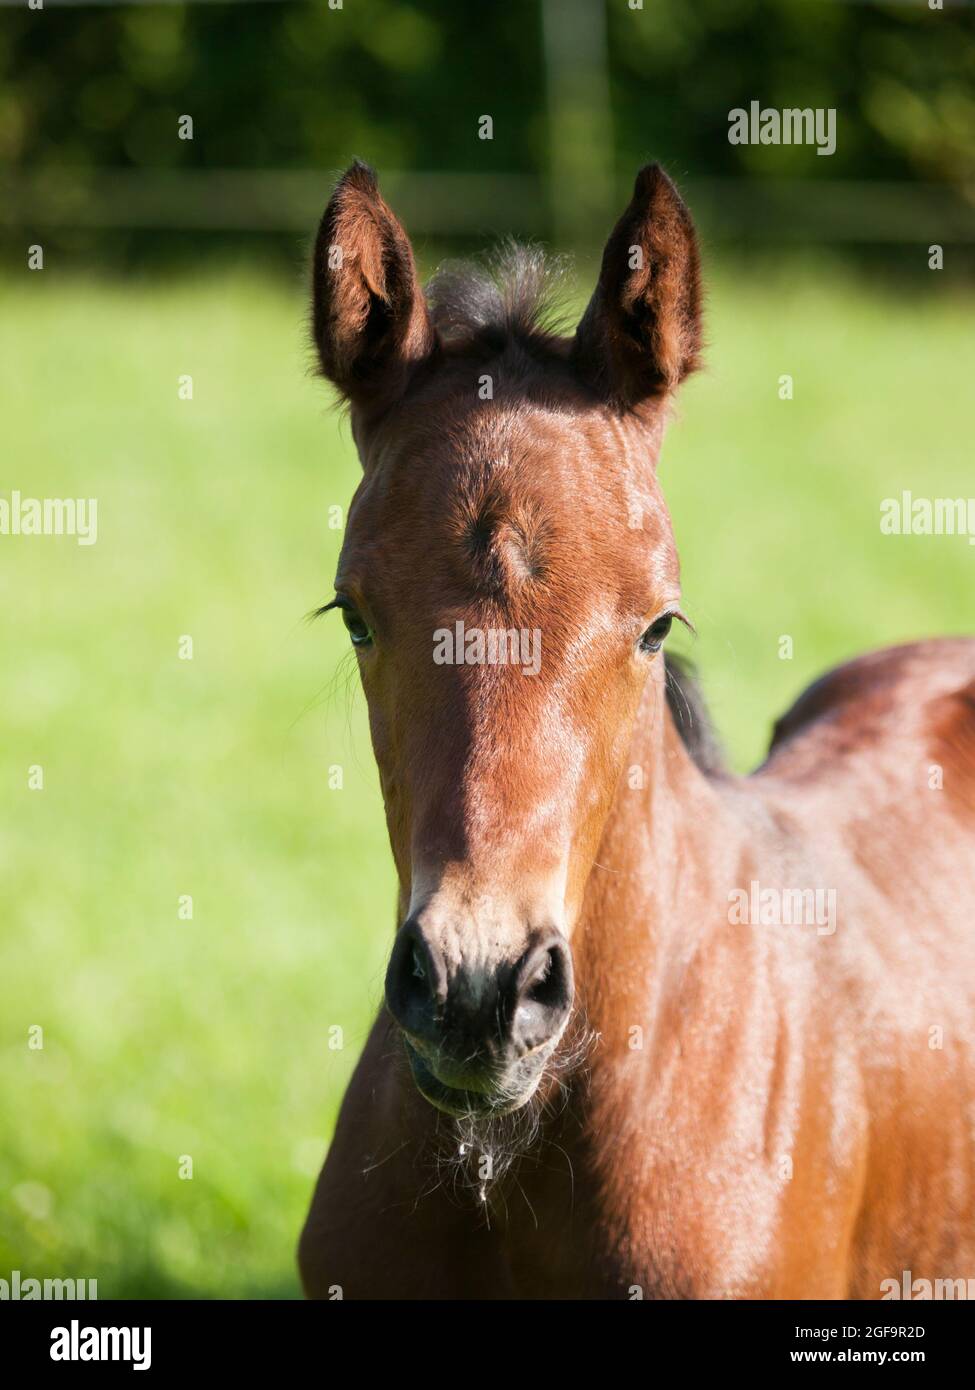 One day old foal portrait Stock Photo